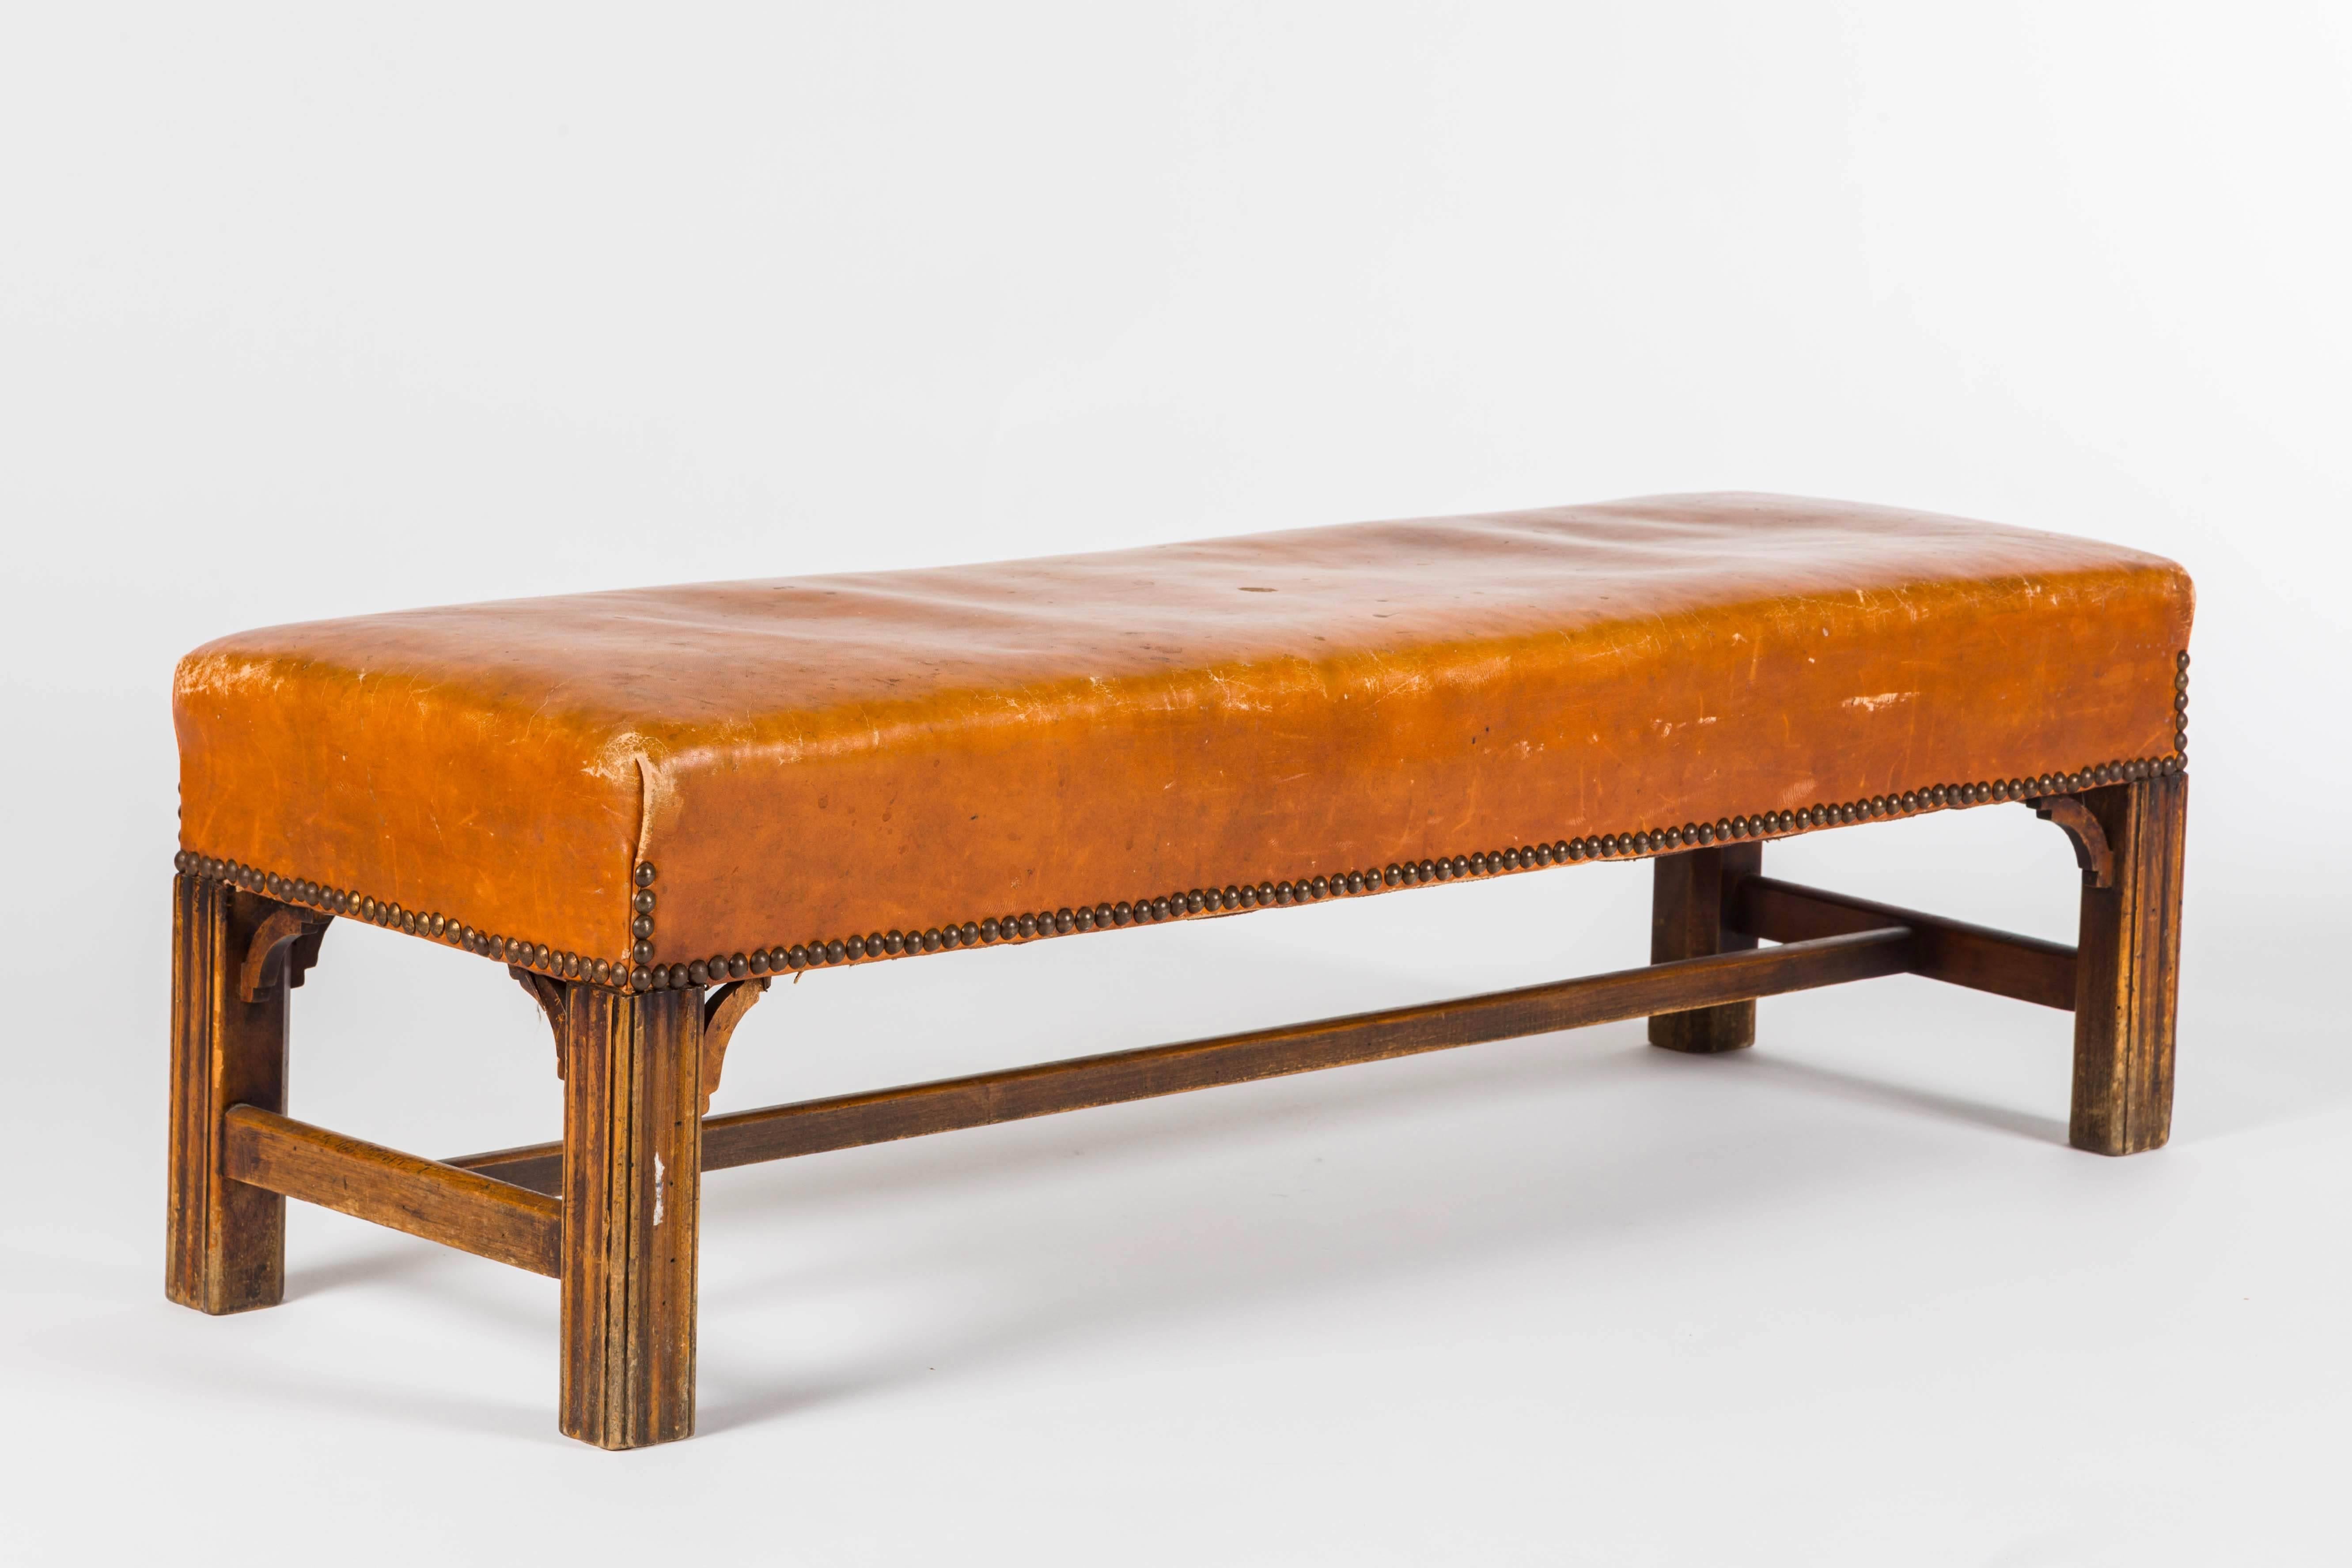 1930s English mahogany low bench with original leather top and brass nailhead detail.